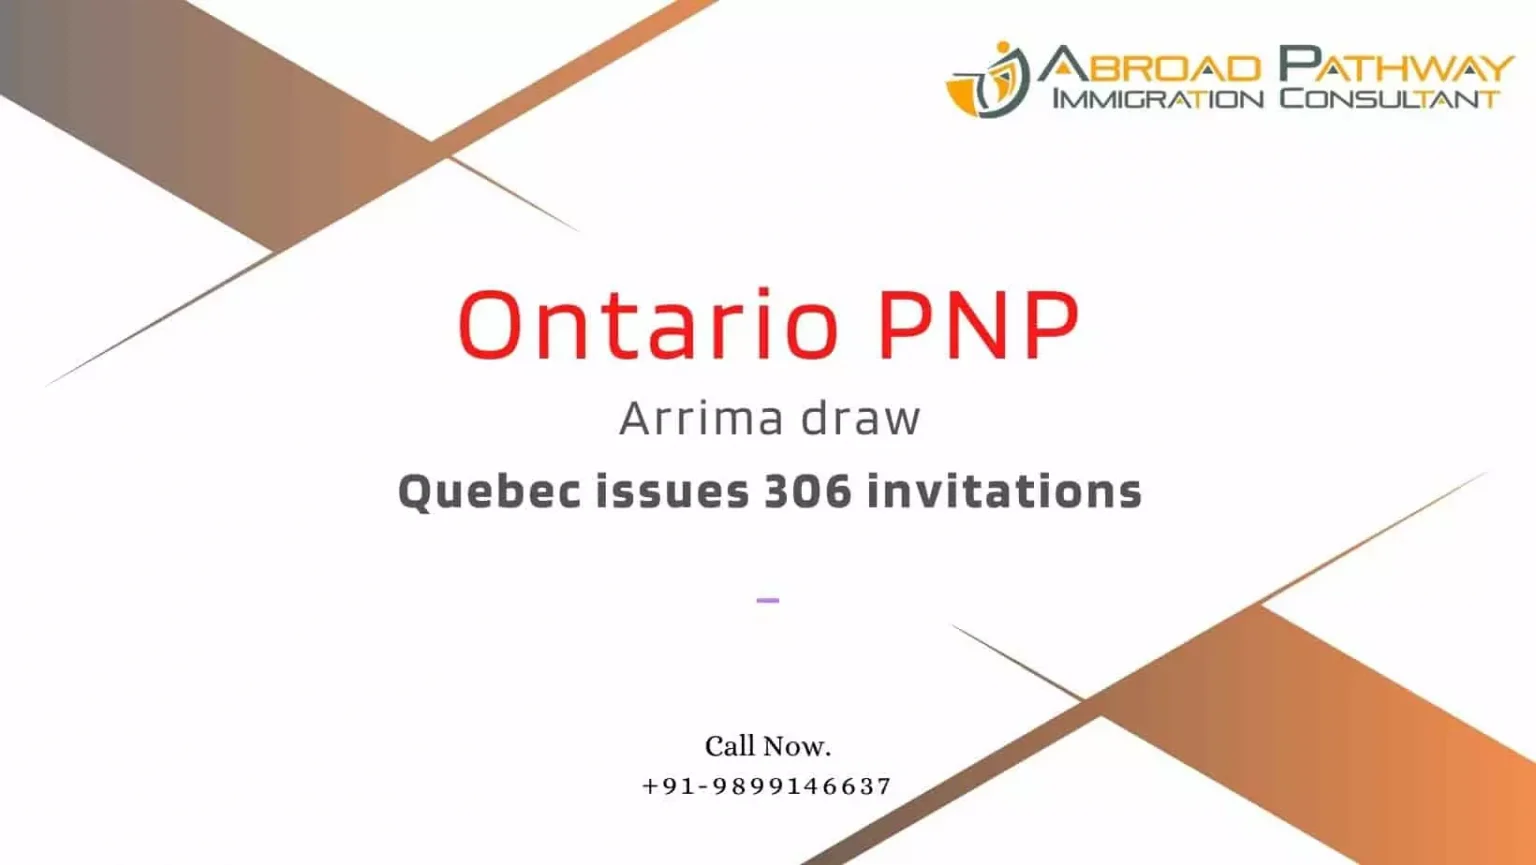 Quebec Fourth Arrima Draw issues 306 invitations